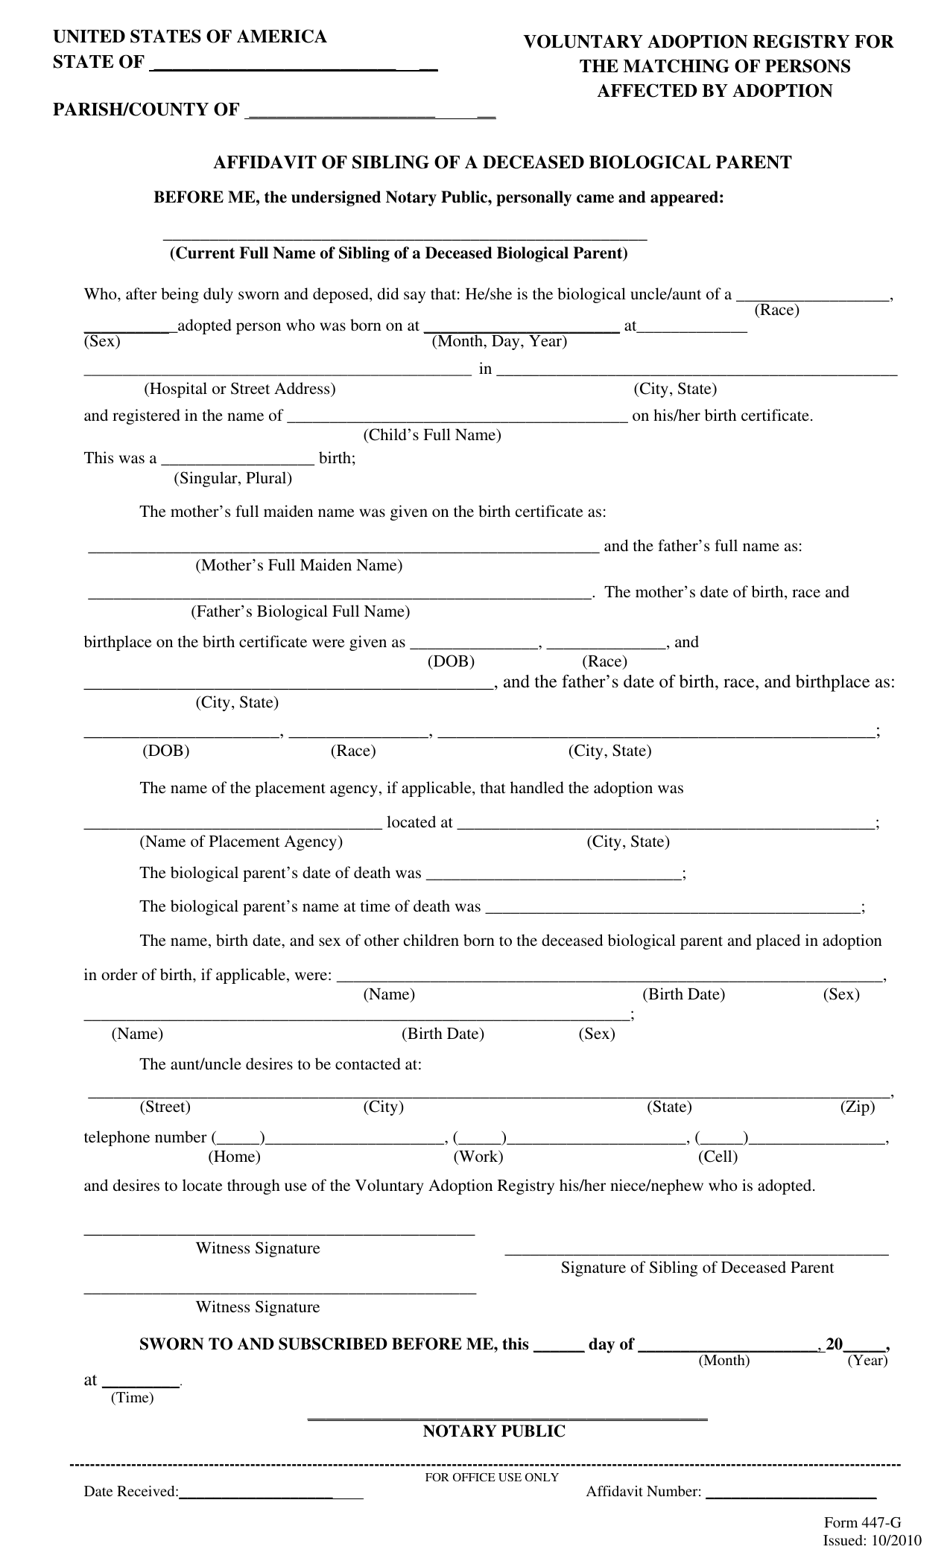 Form 447-G Affidavit of Sibling of a Deceased Biological Parent - Louisiana, Page 1